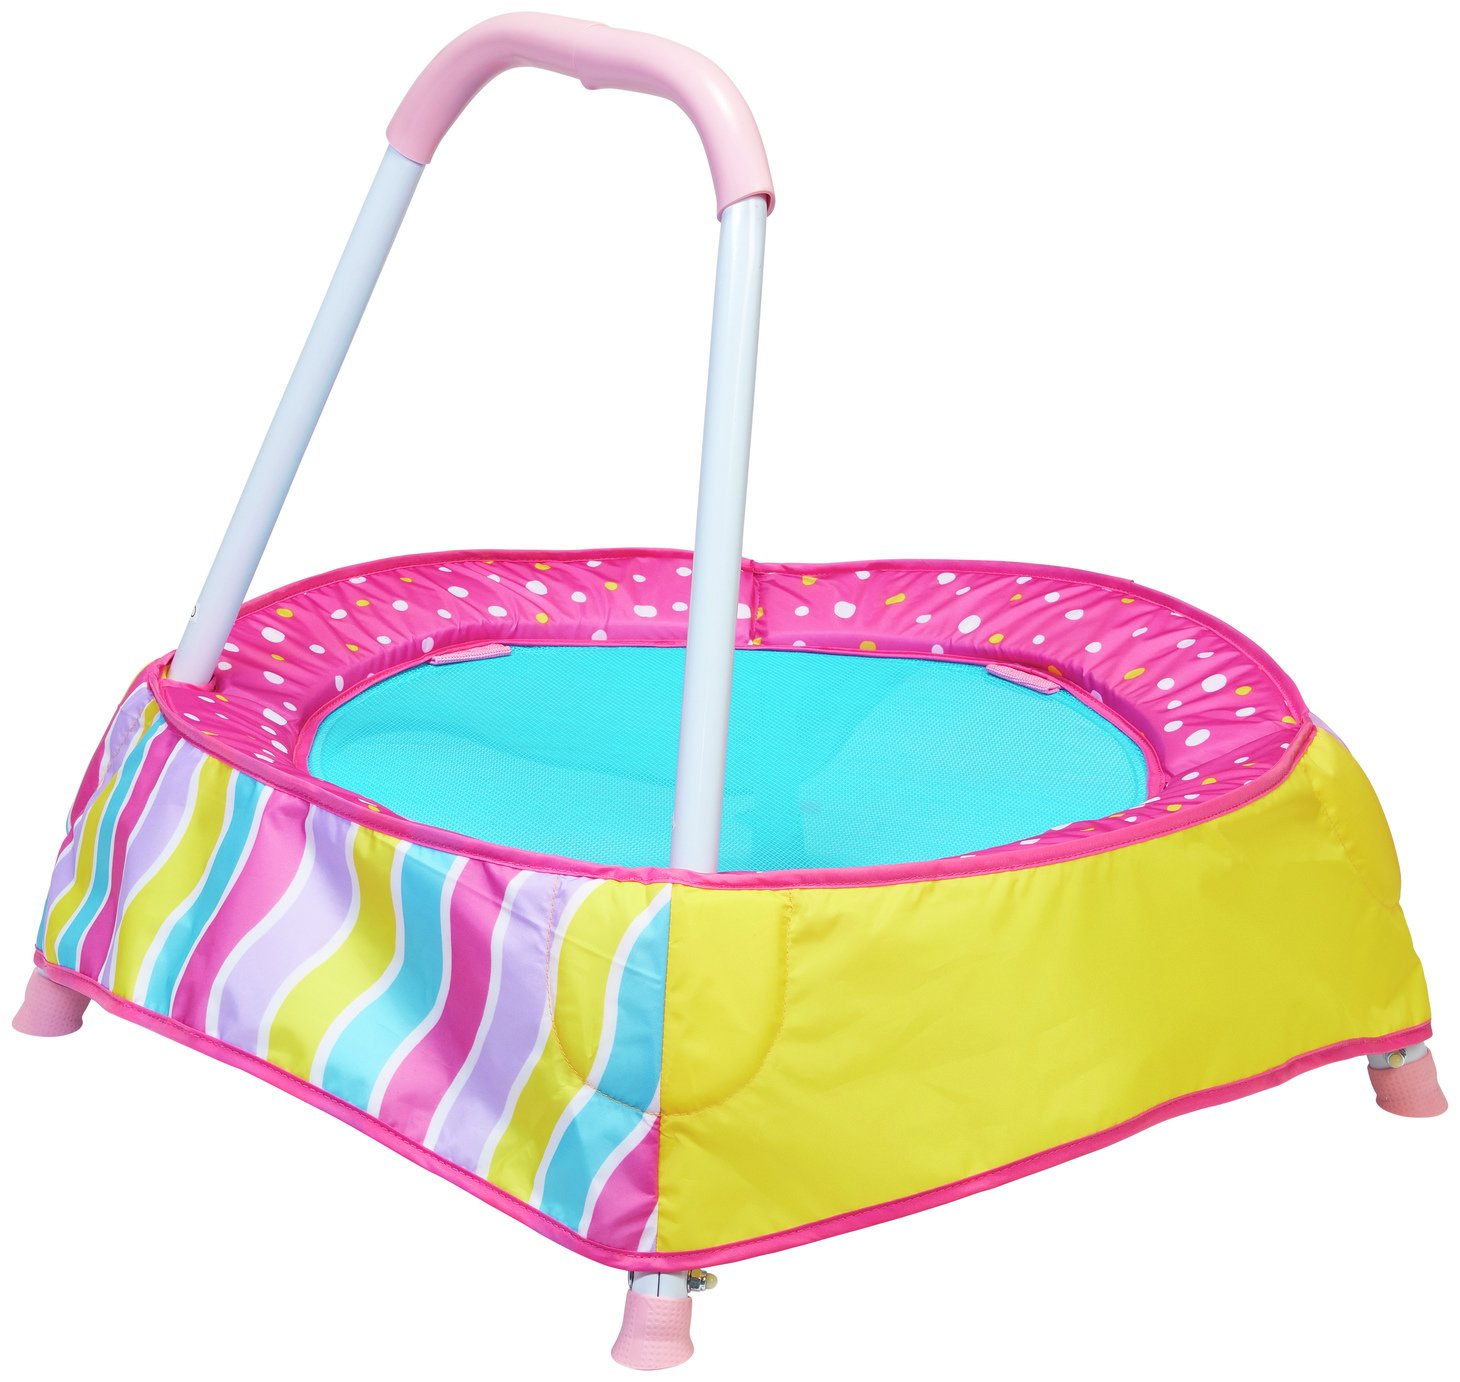 Chad Valley 2 Ft. Toddler Trampoline - Pink